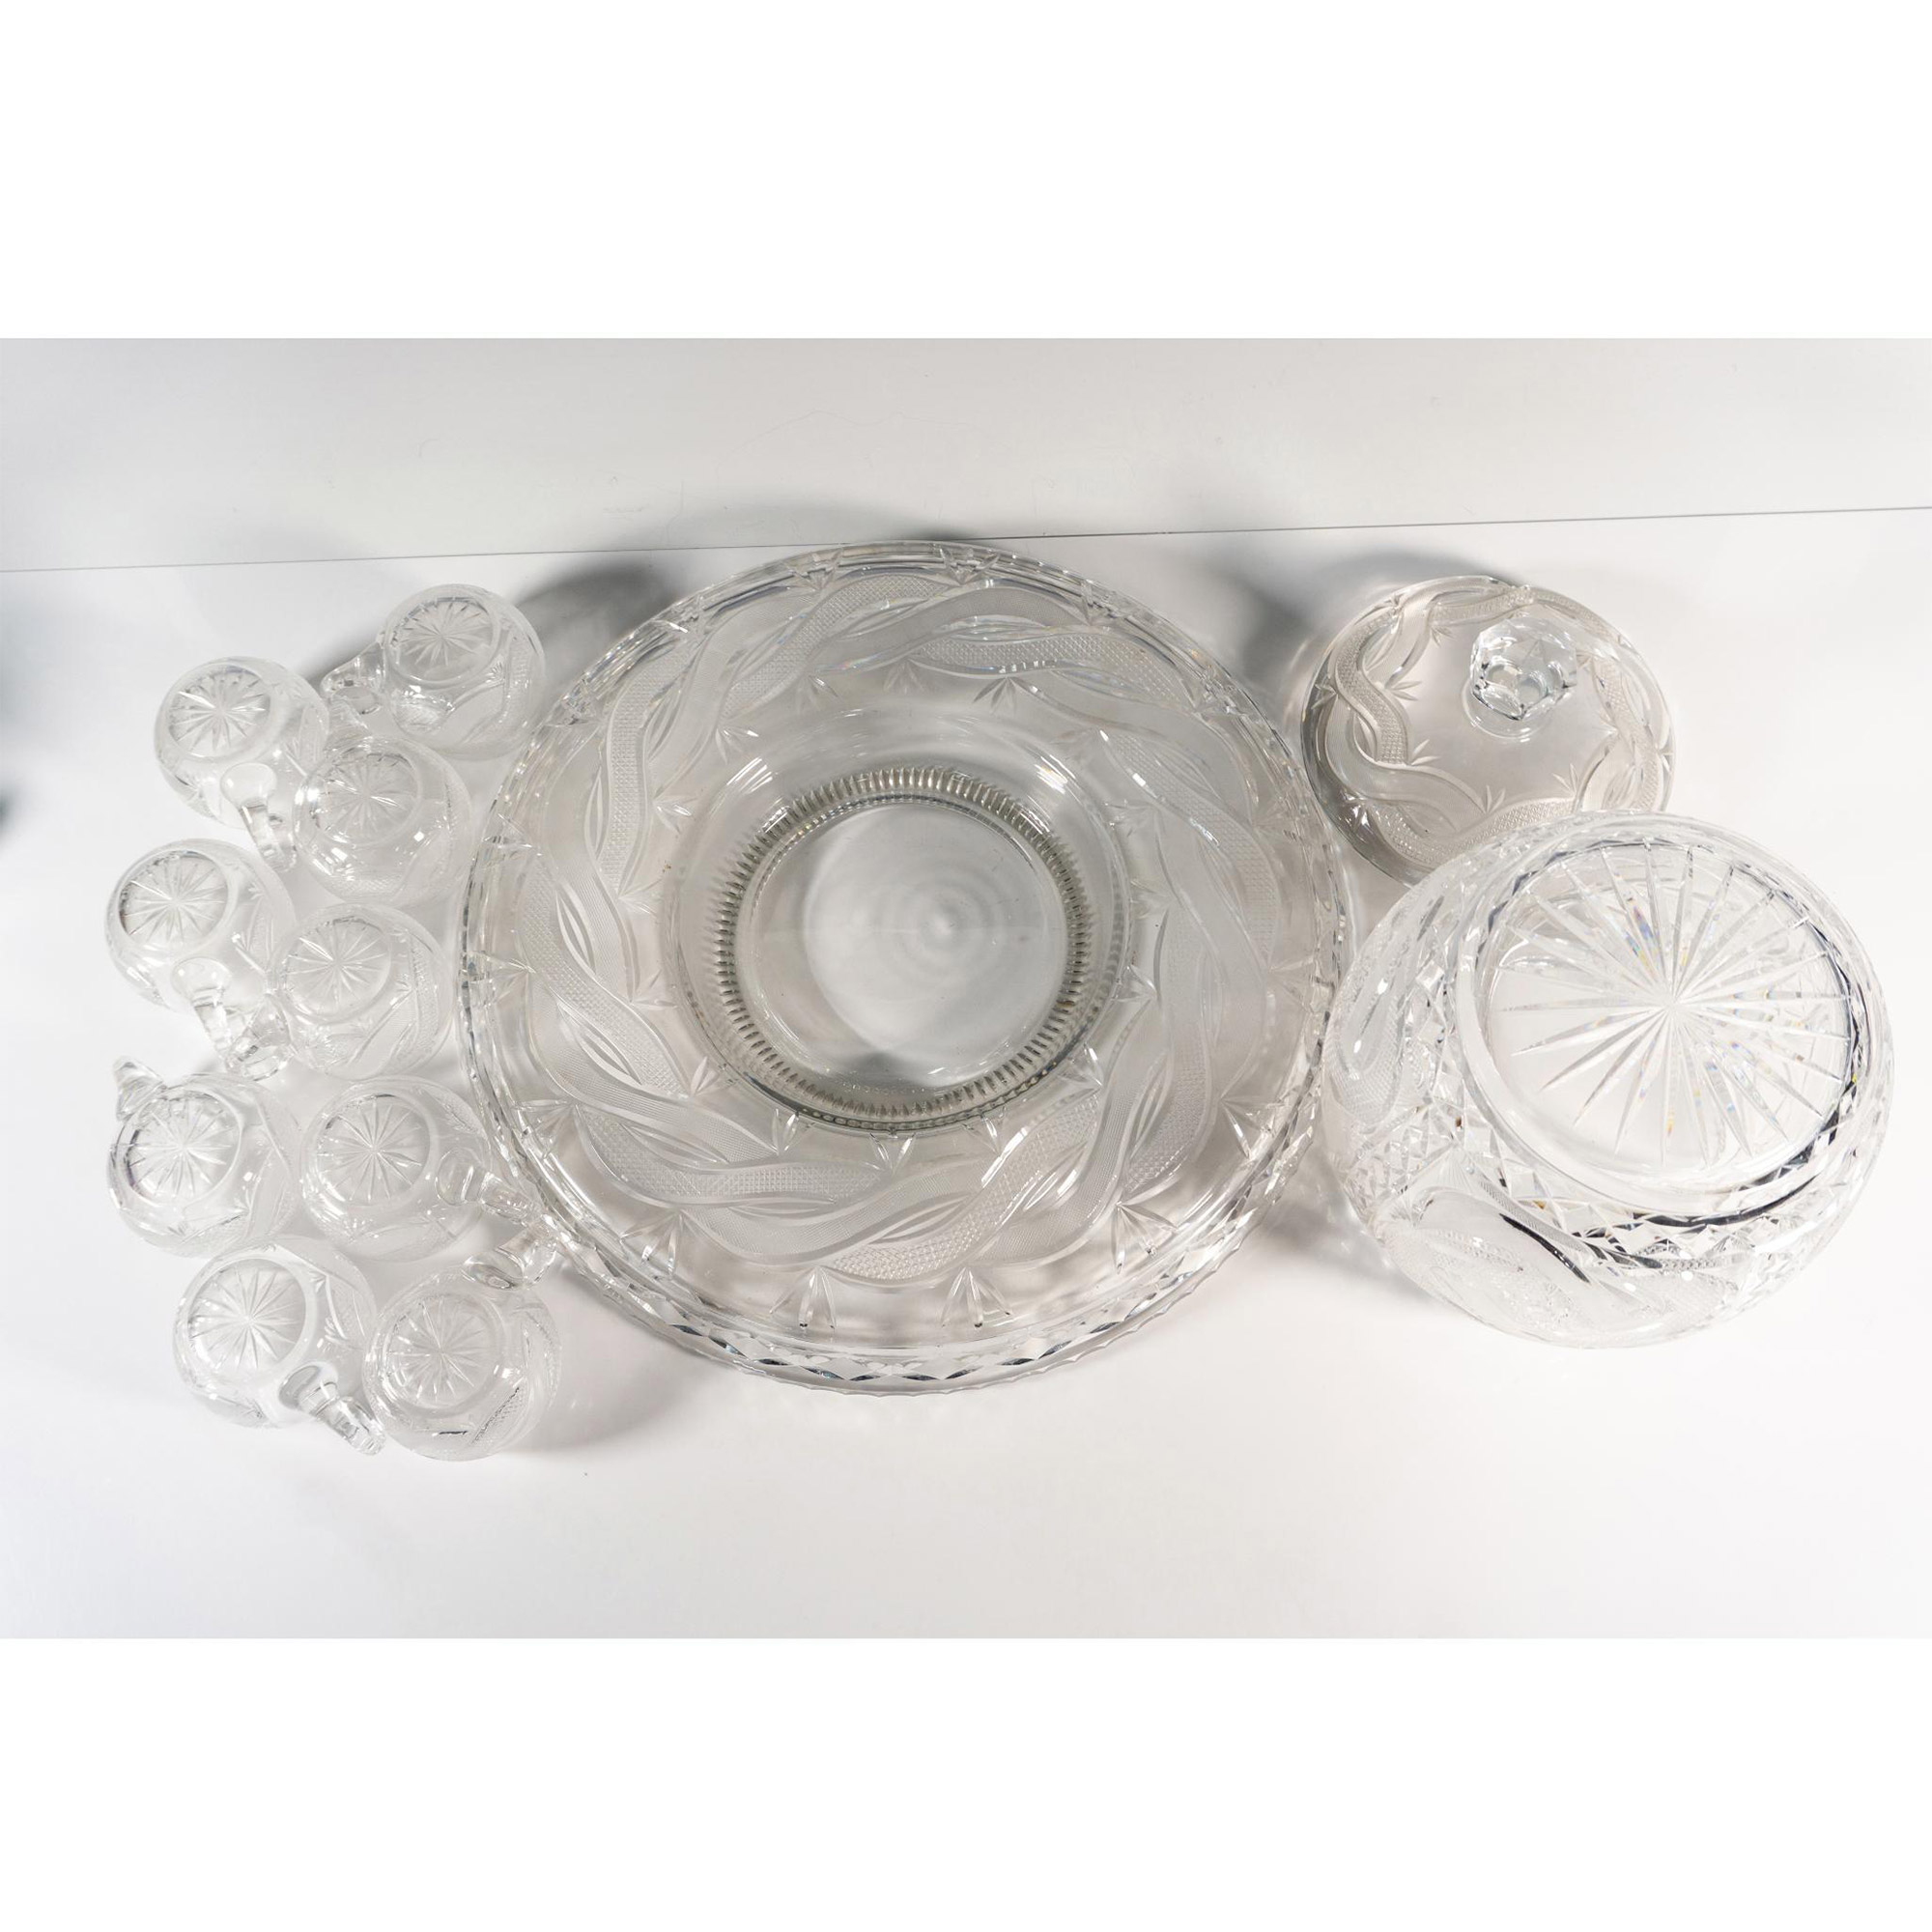 11pc Cut Crystal Lidded Punch Bowl, Tray & Cups Set - Image 4 of 4